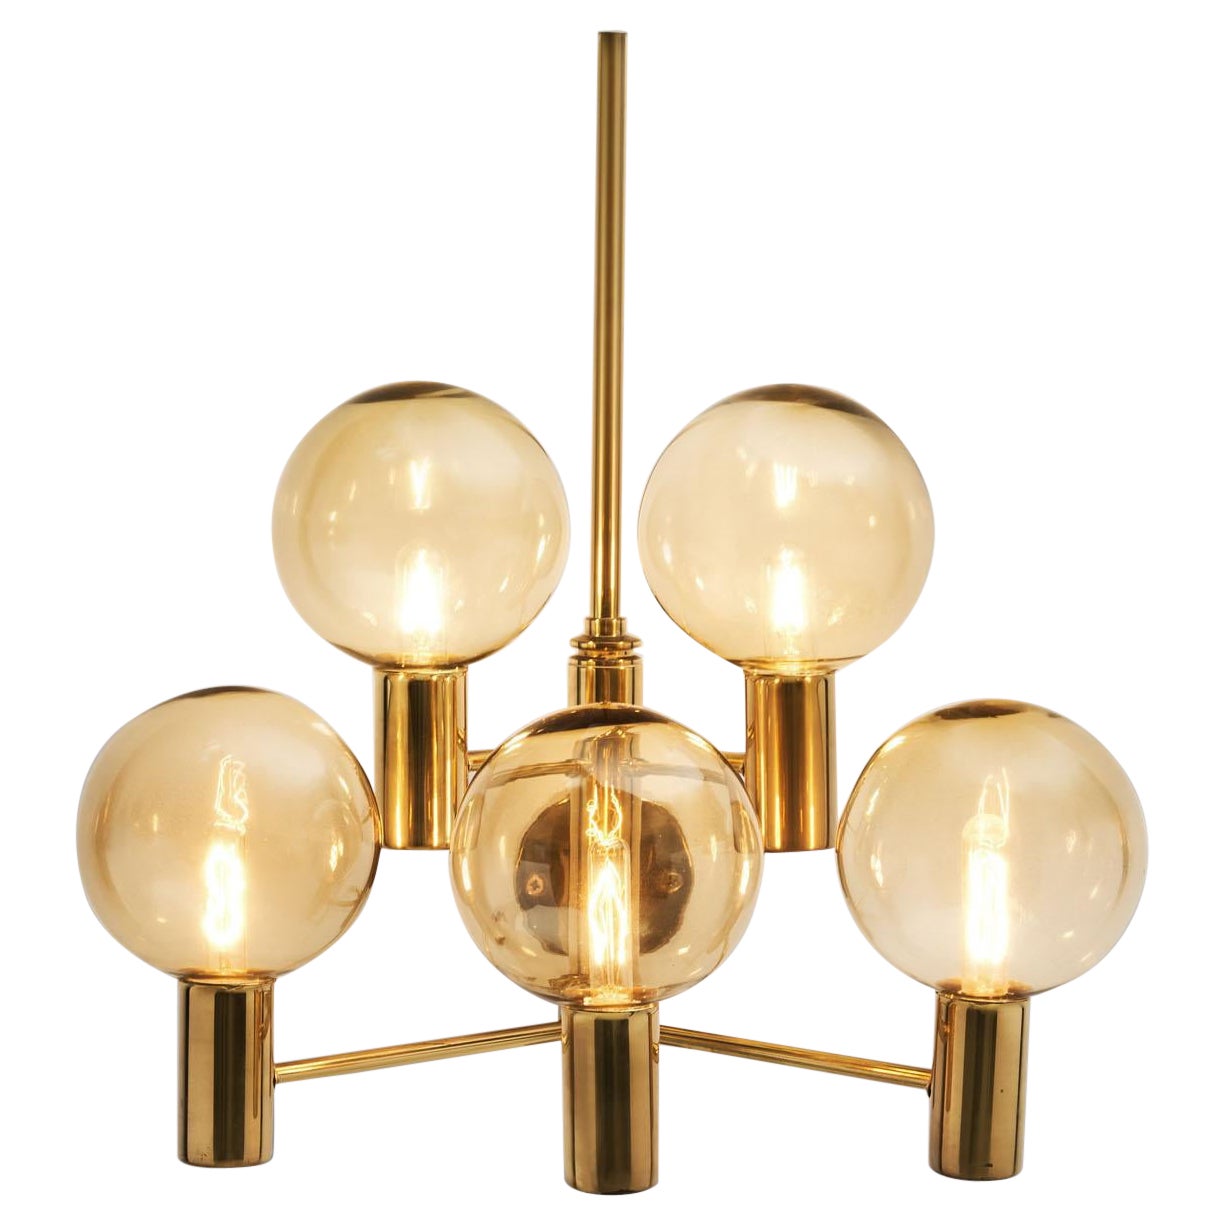 Hans-Agne Jakobsson Brass Wall Lamp with Smoked Glass Shades, Sweden, 1960s For Sale